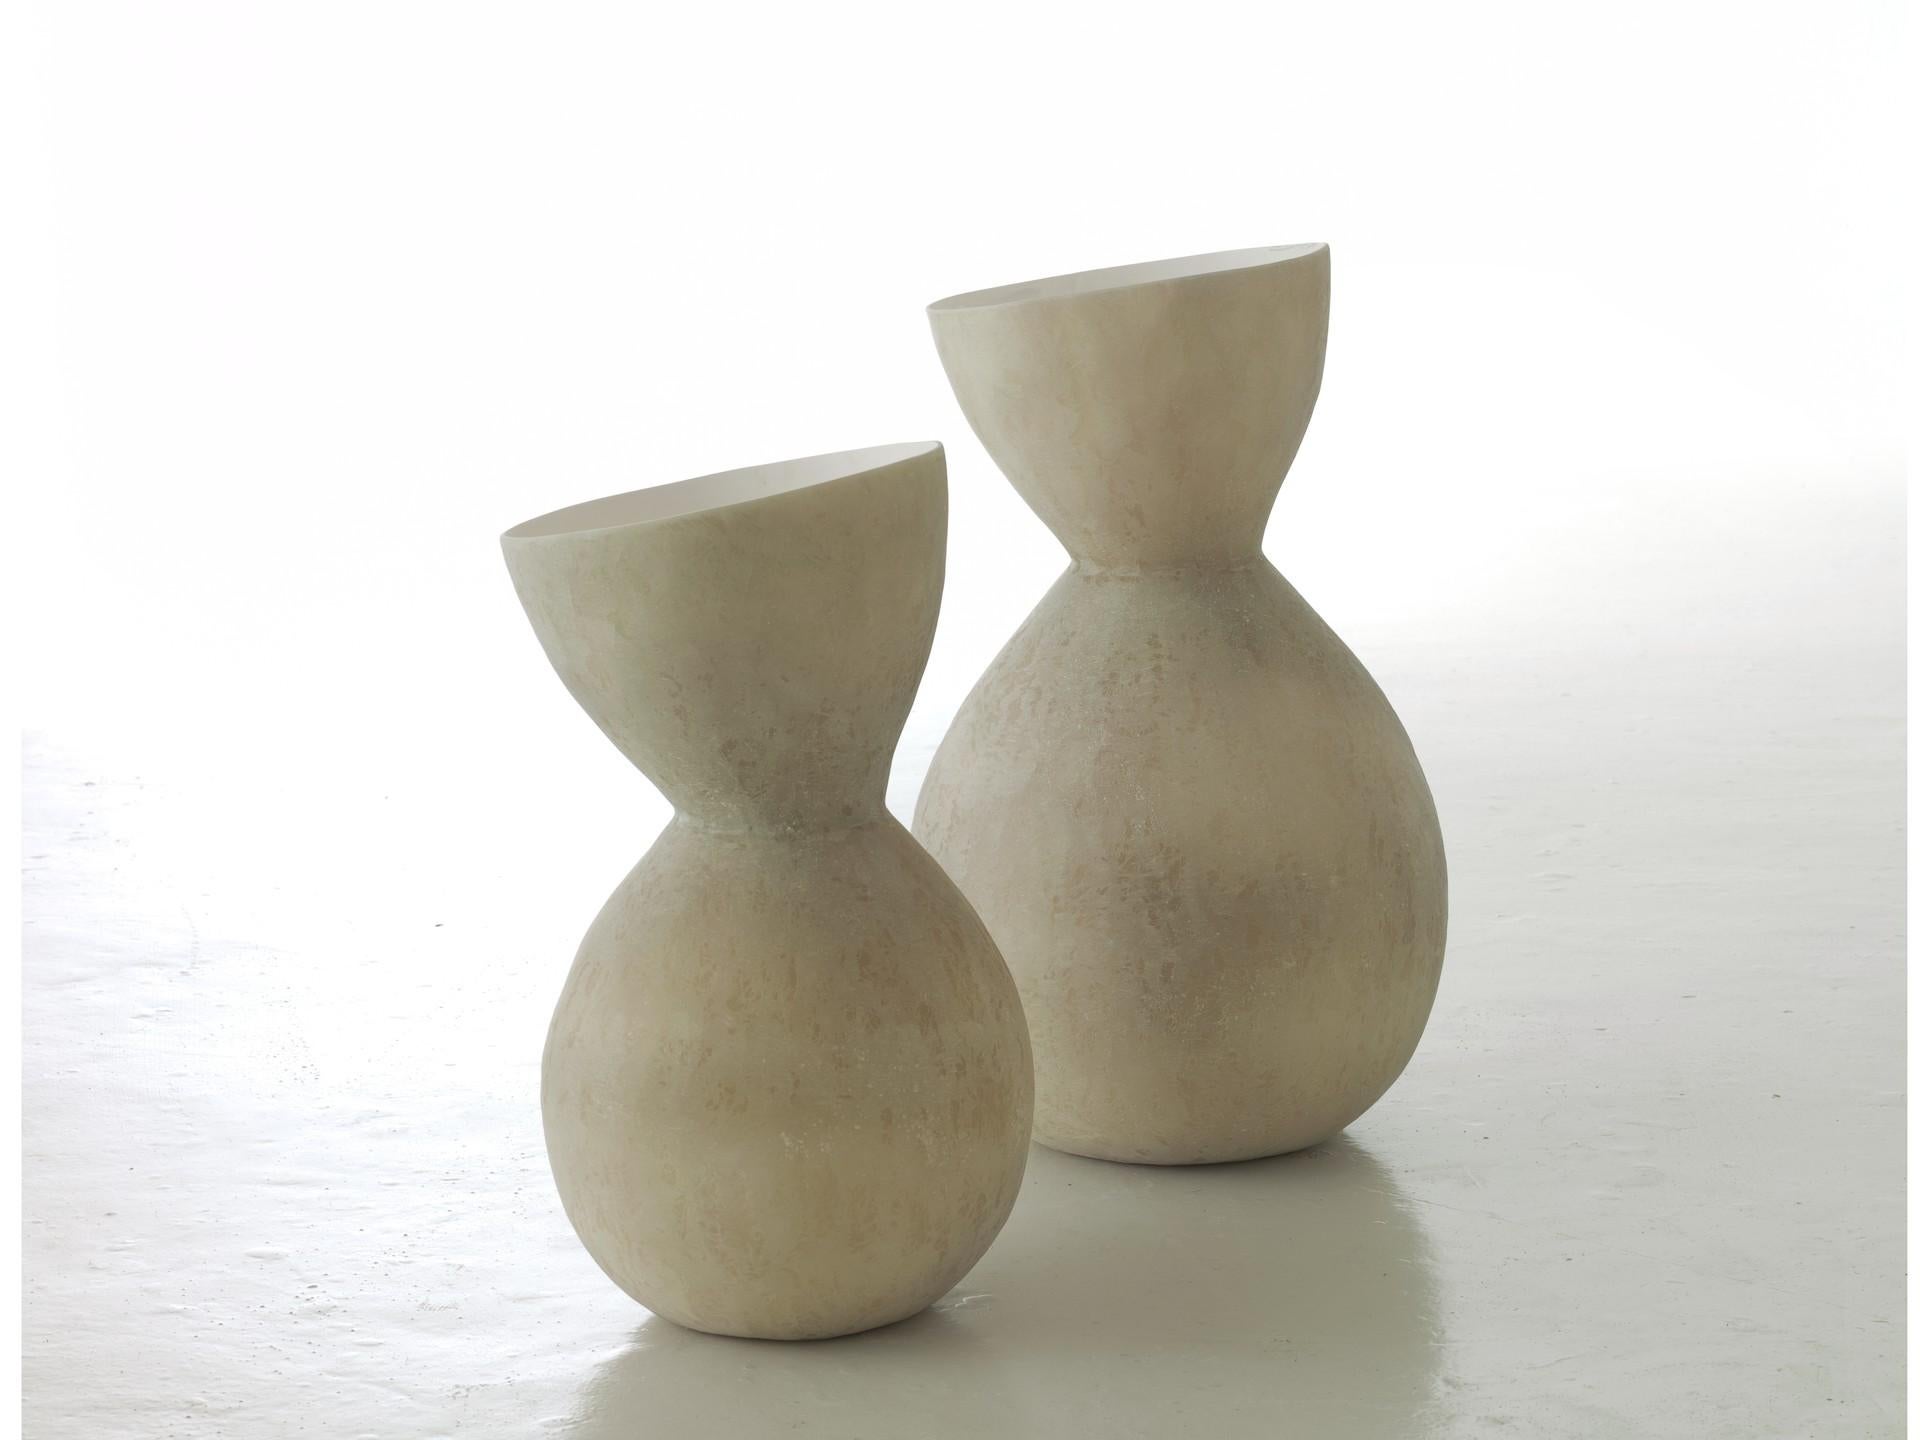 Pair of Incline vases by Imperfettolab
Dimensions: 
Ø 38 x H 67 cm
Ø 30 x H 55 cm
Materials: Raw material.


Imperfetto Lab
Who we are ? We are a family.
Verter Turroni, Emanuela Ravelli and our children Elia, Margherita and Eusebio.
All